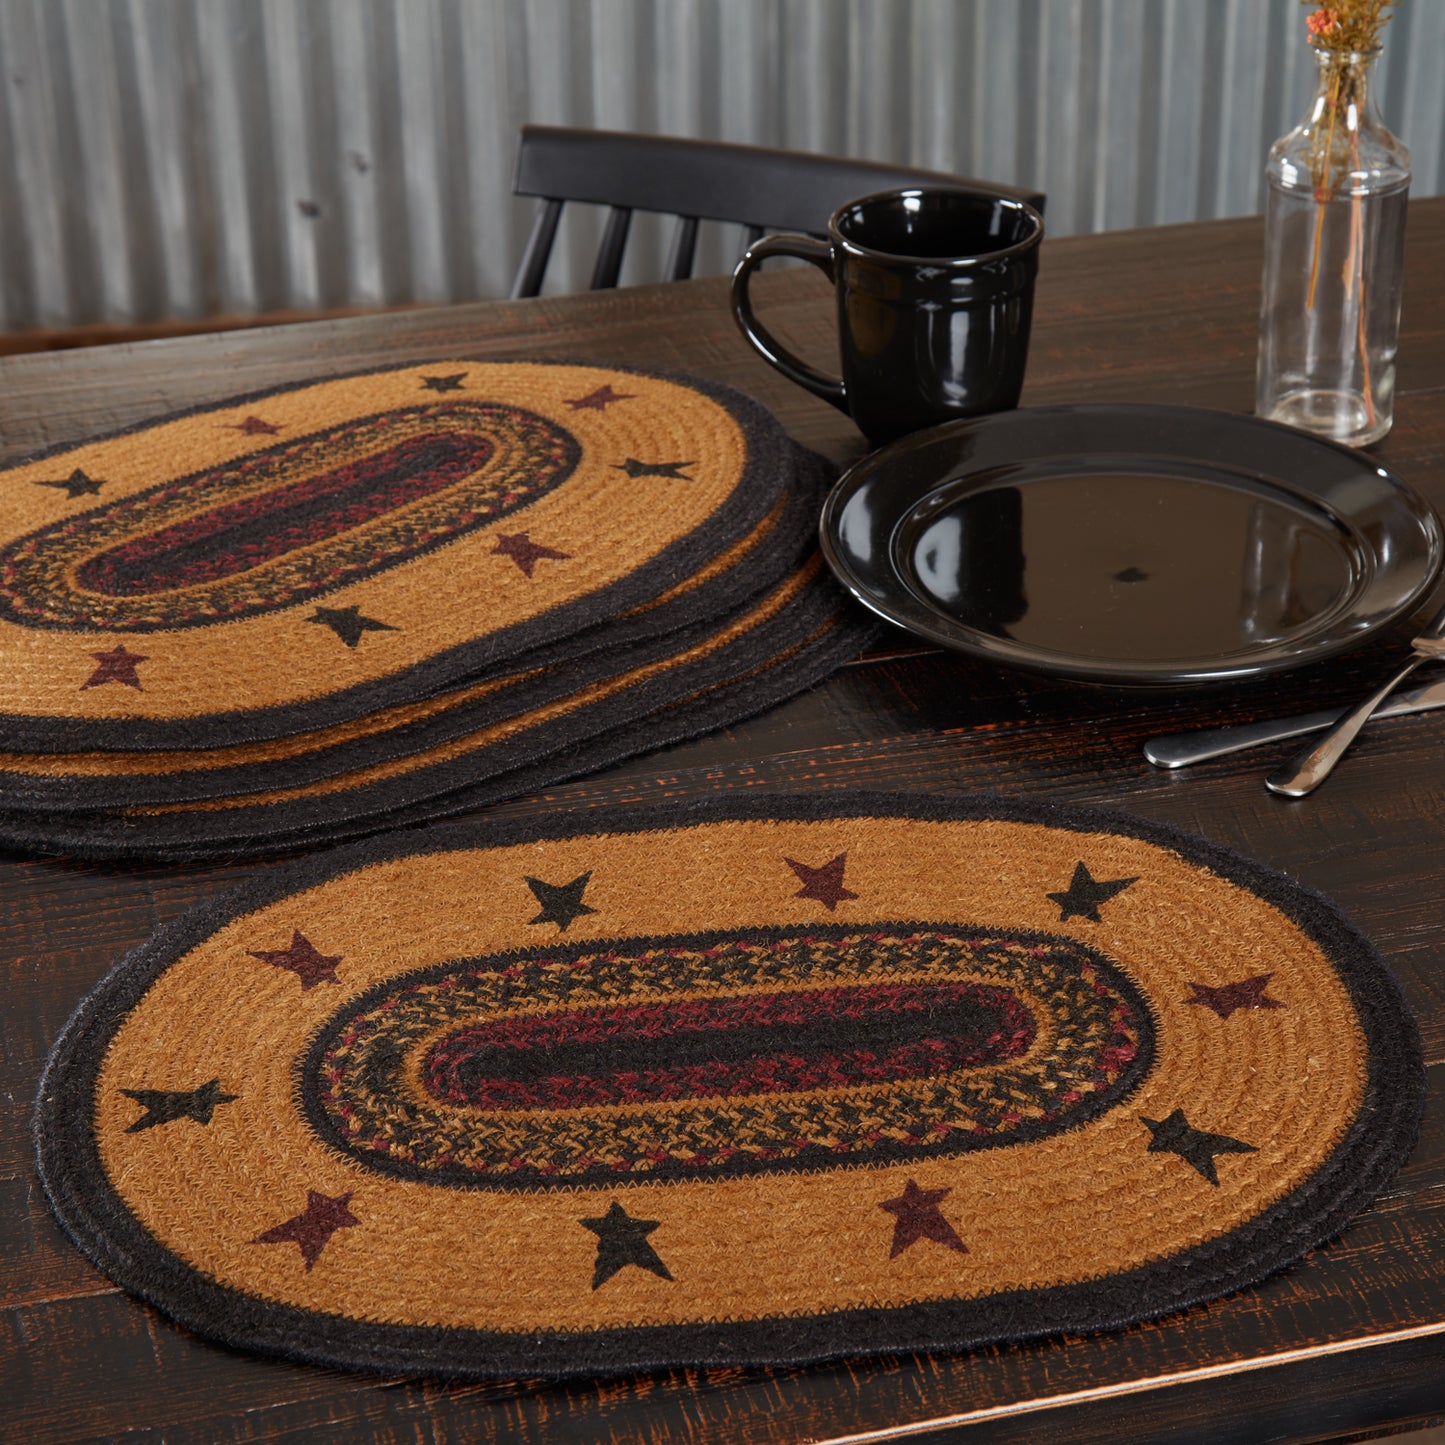 34063-Heritage-Farms-Star-Jute-Placemat-Set-of-6-12x18-image-5